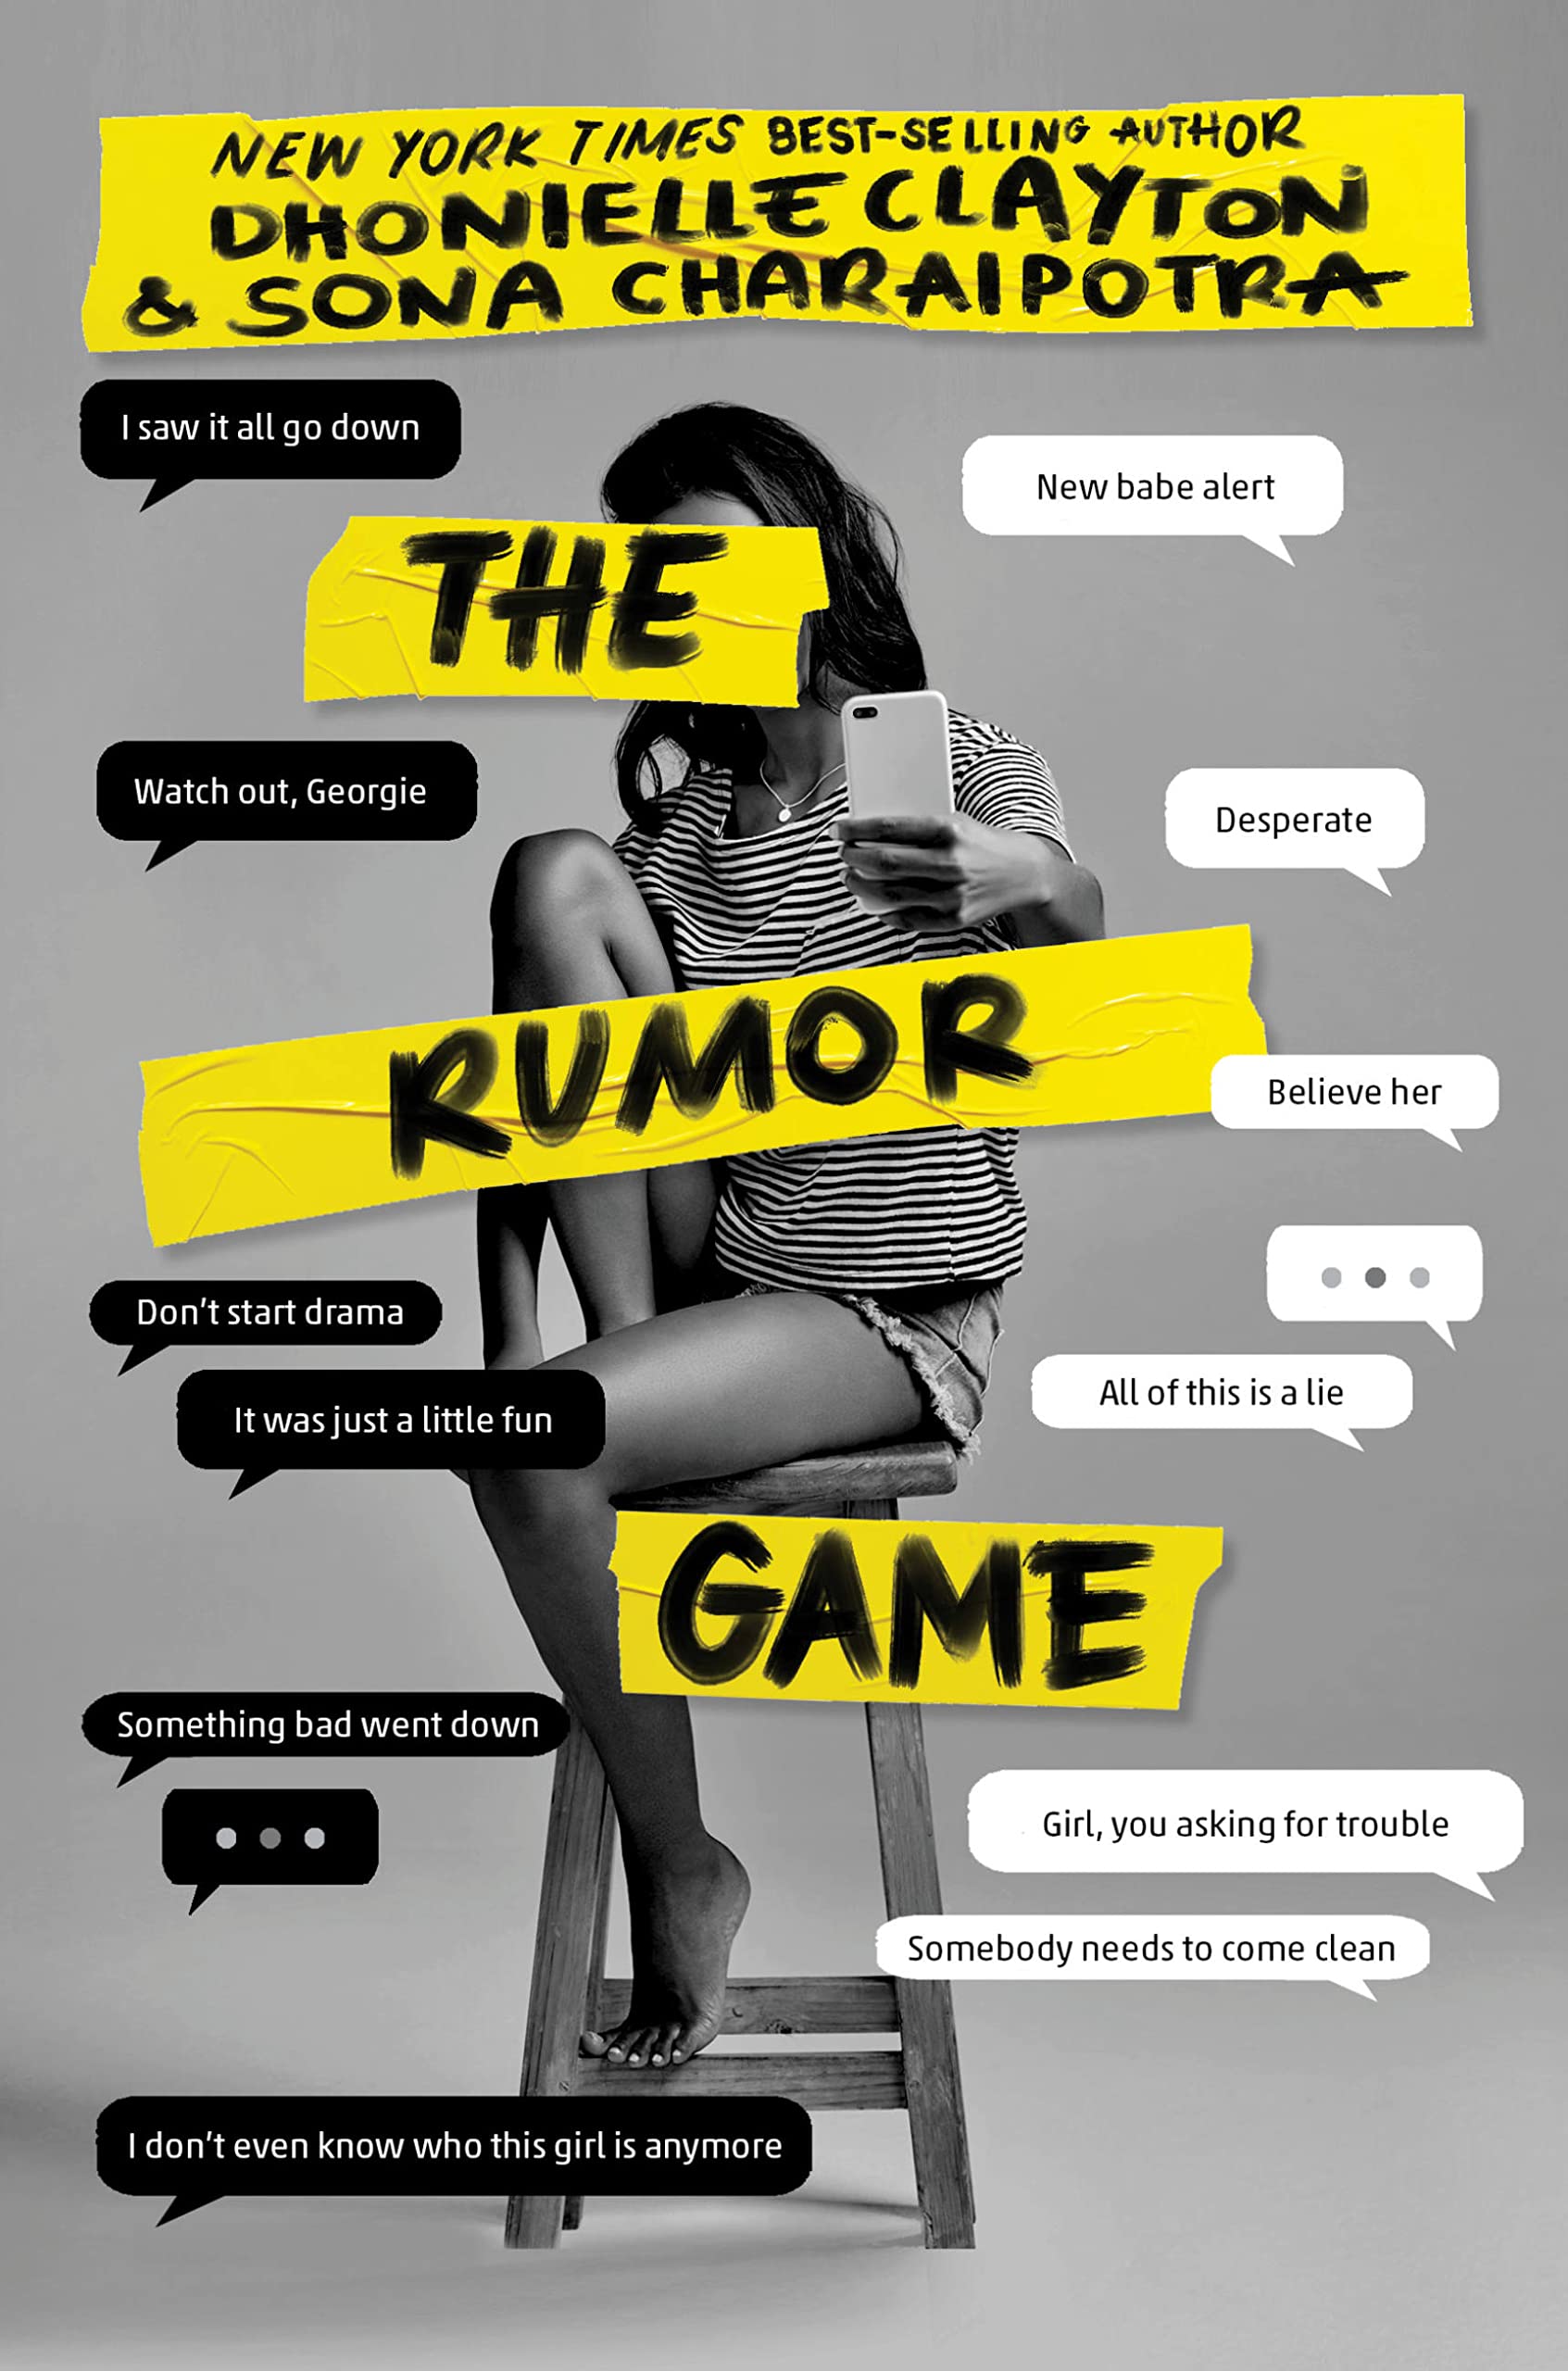 Cover of “The Rumor Game” by Dhonielle Clayton and Sona Charaipotra